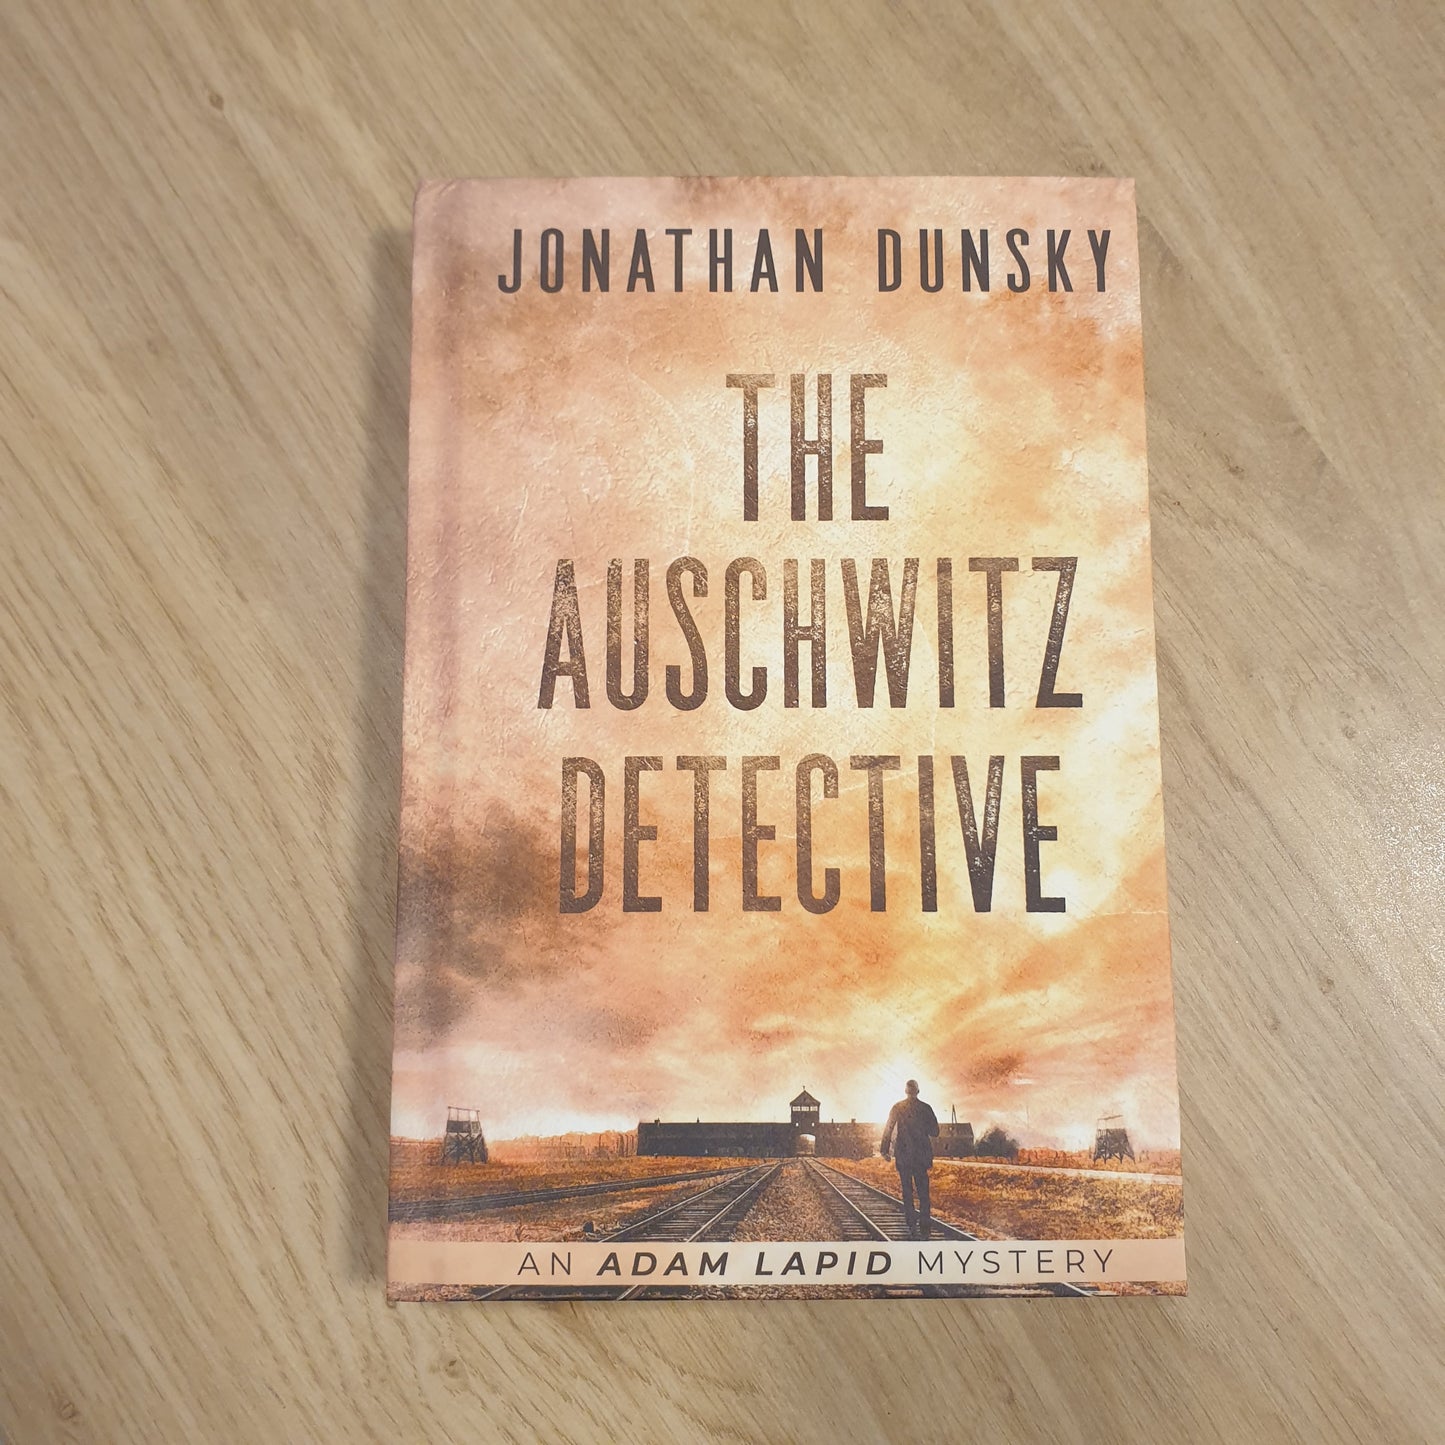 The Auschwitz Detective on table